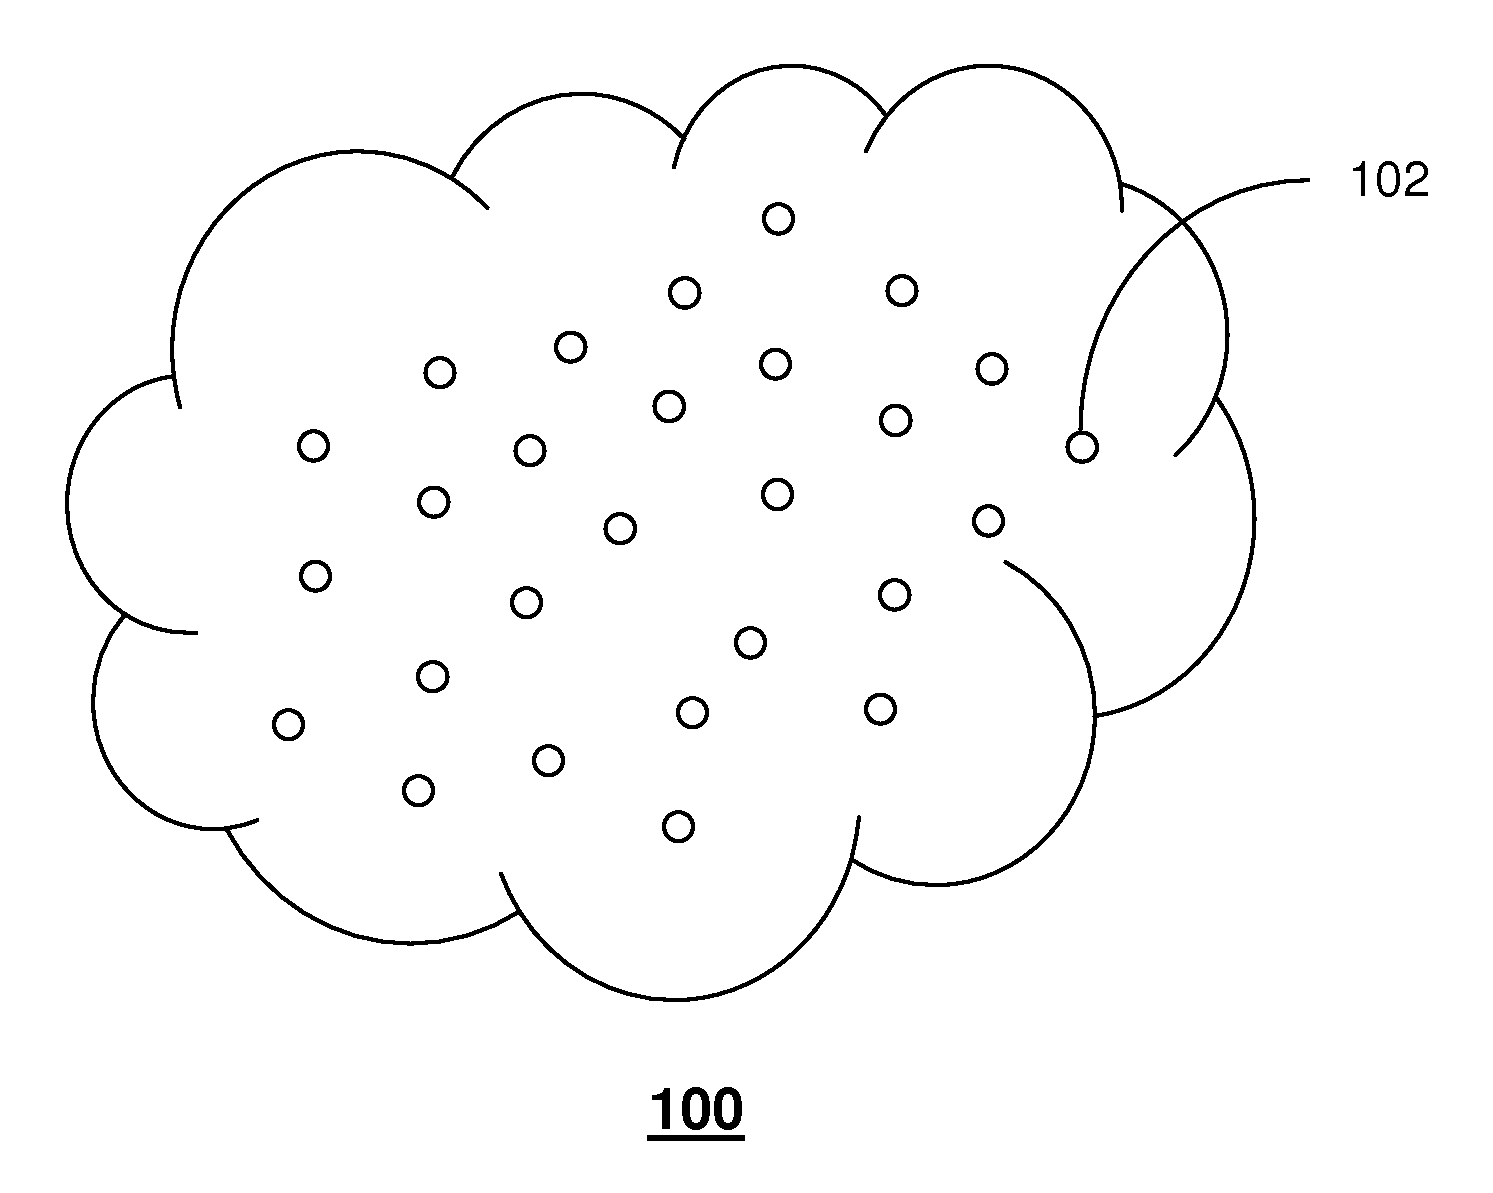 Method and system for managing a network of sensors